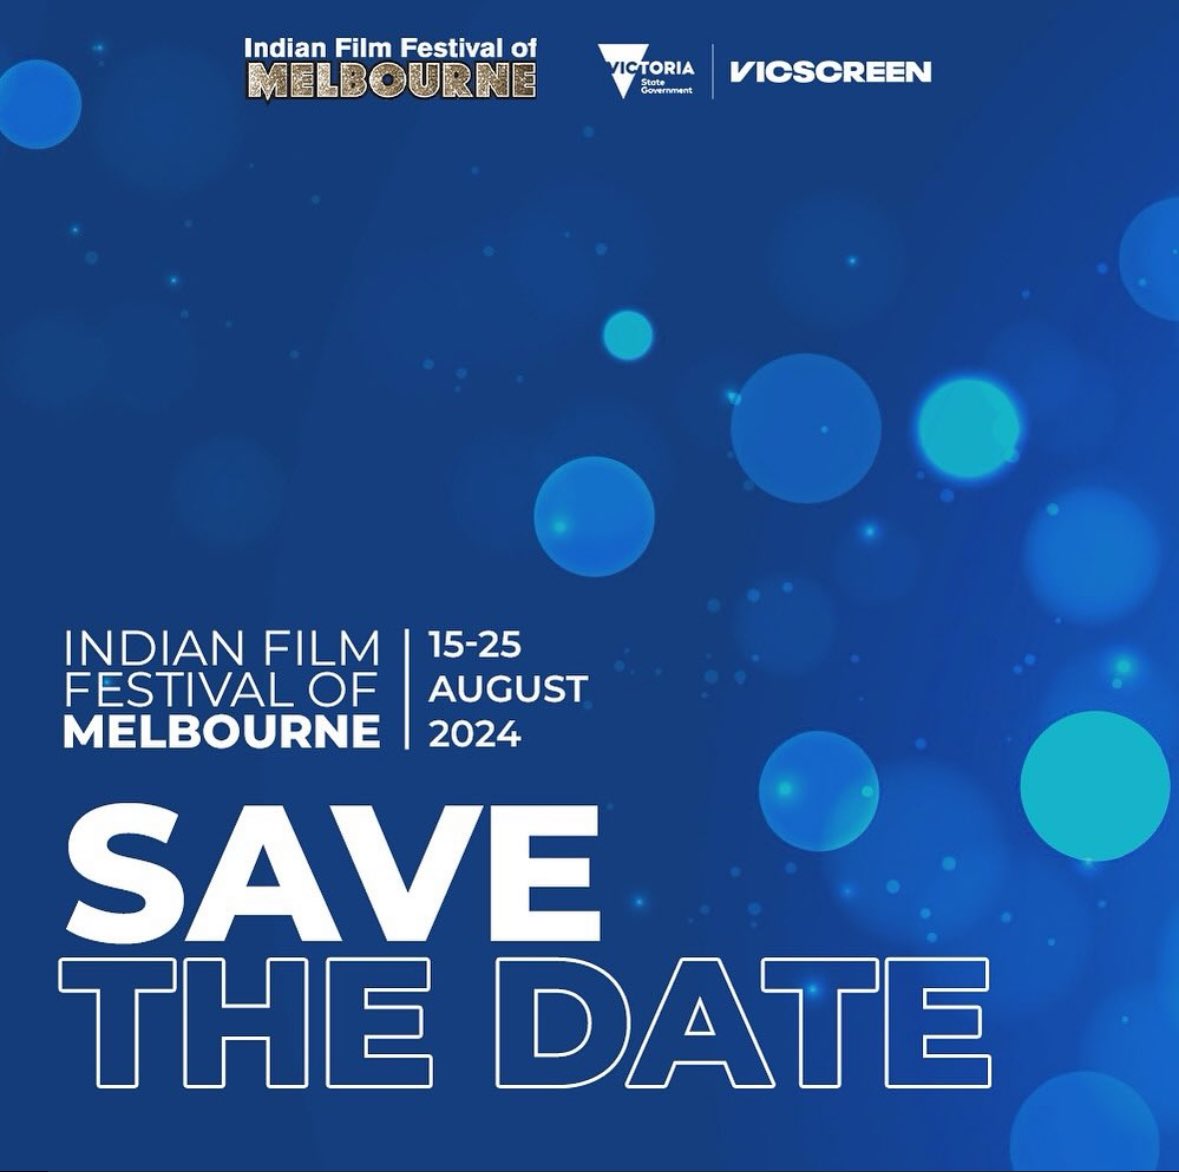 Only three months left for the 15th year of the Indian Film Festival Of Melbourne to take off. Save the date and book the best seats for the IFFM AWARDS NIGHT now! 

#savethedate #IFFM2024 #IndianFilmFestivalOfMelbourne